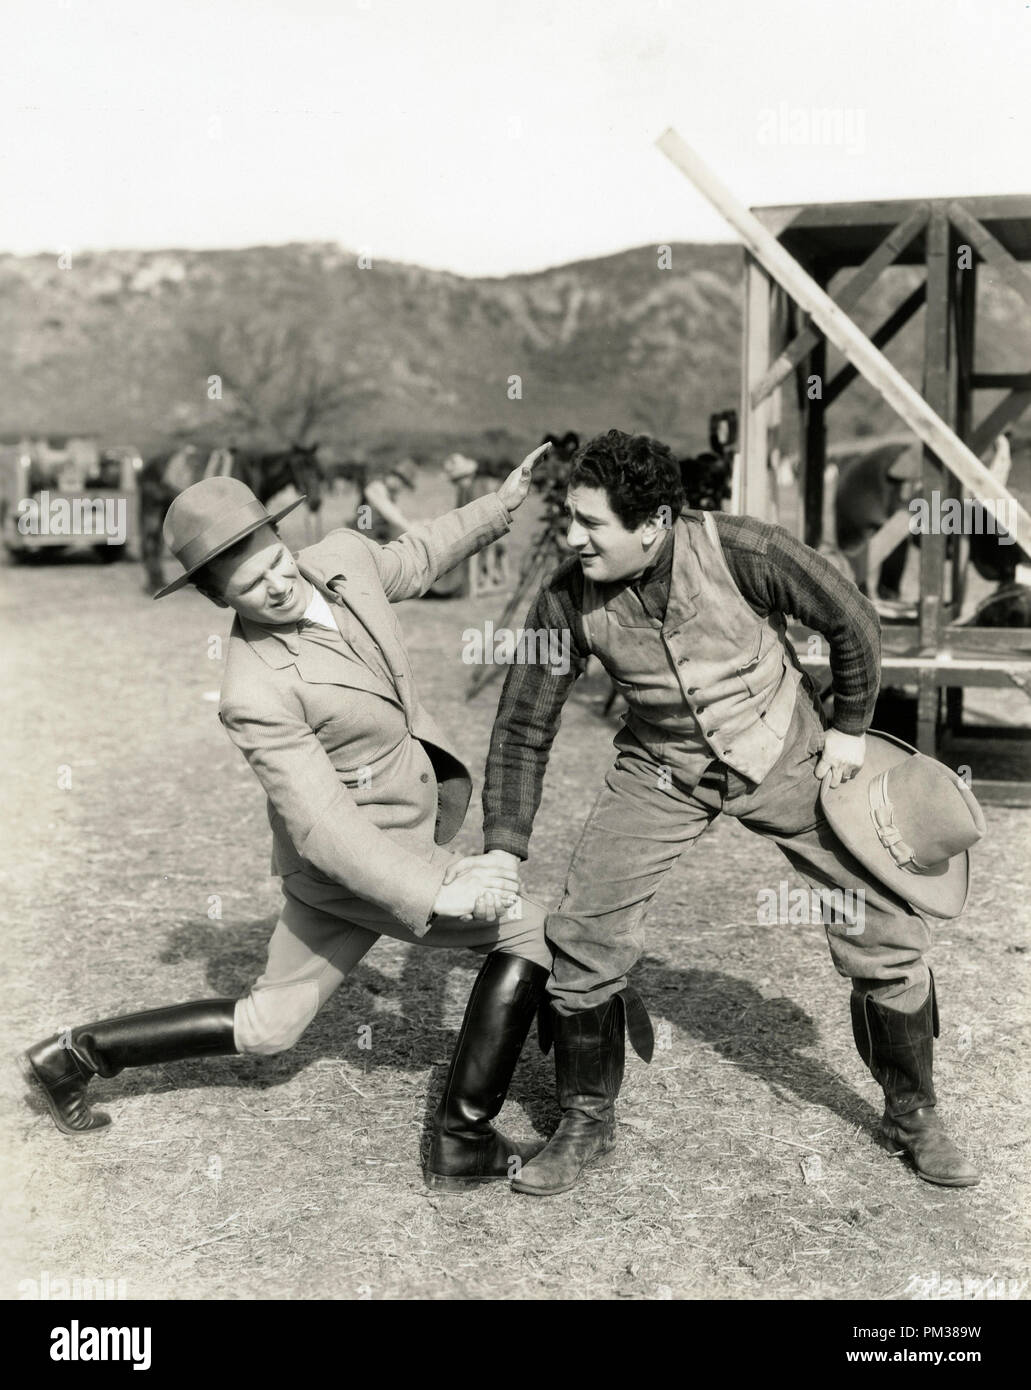 Silent film scene still. Two men in boots and western wear grappling, 1930.  File Reference # 1183 010THA Stock Photo